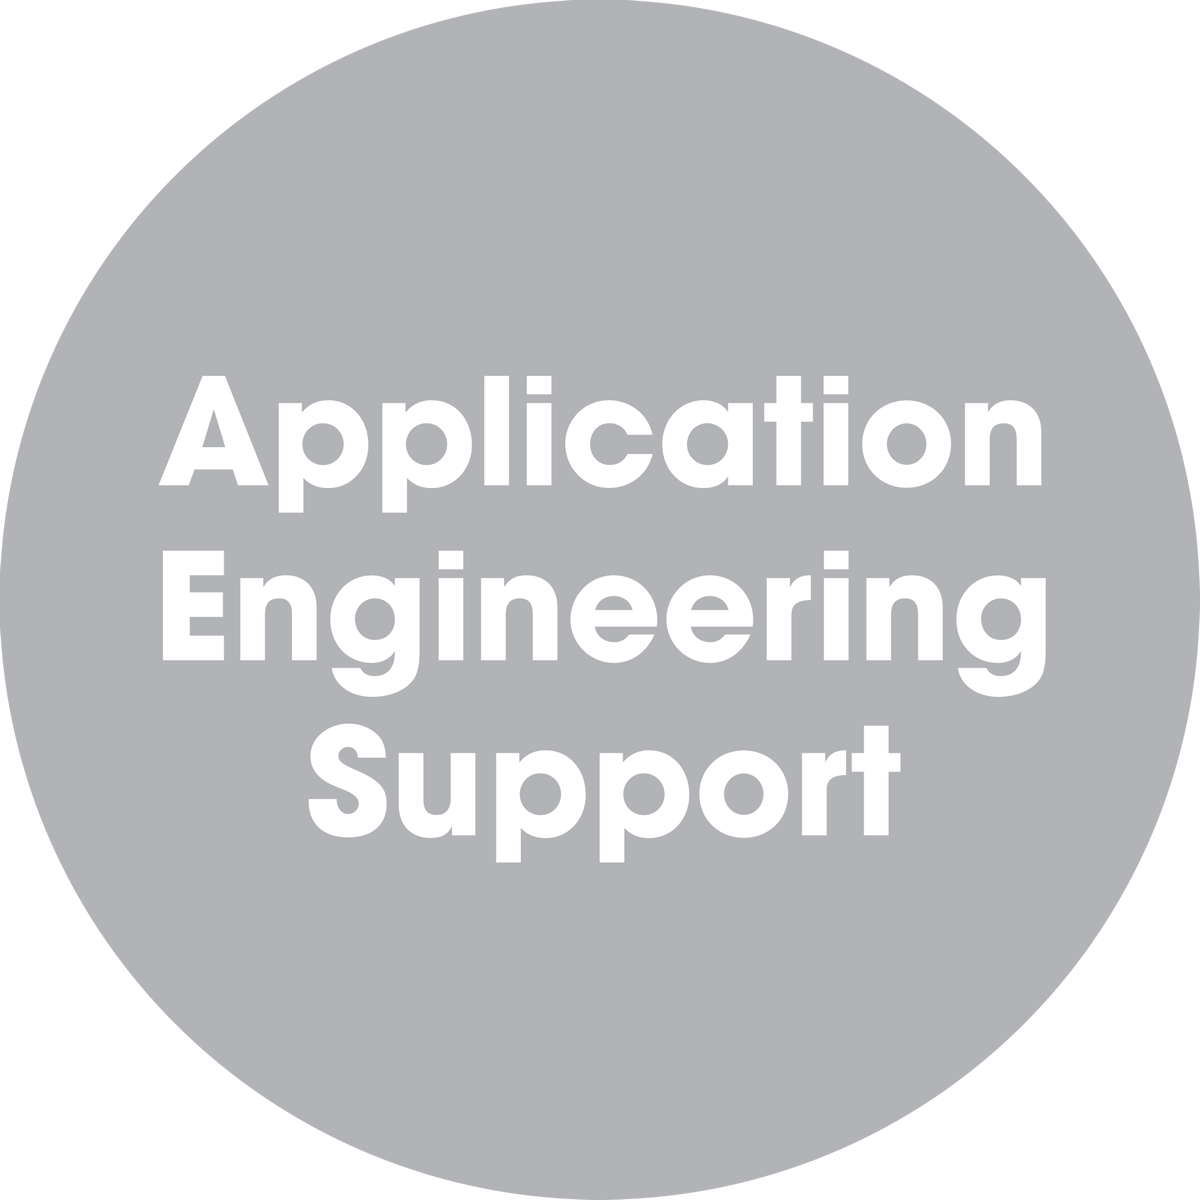 Application Engineering Support